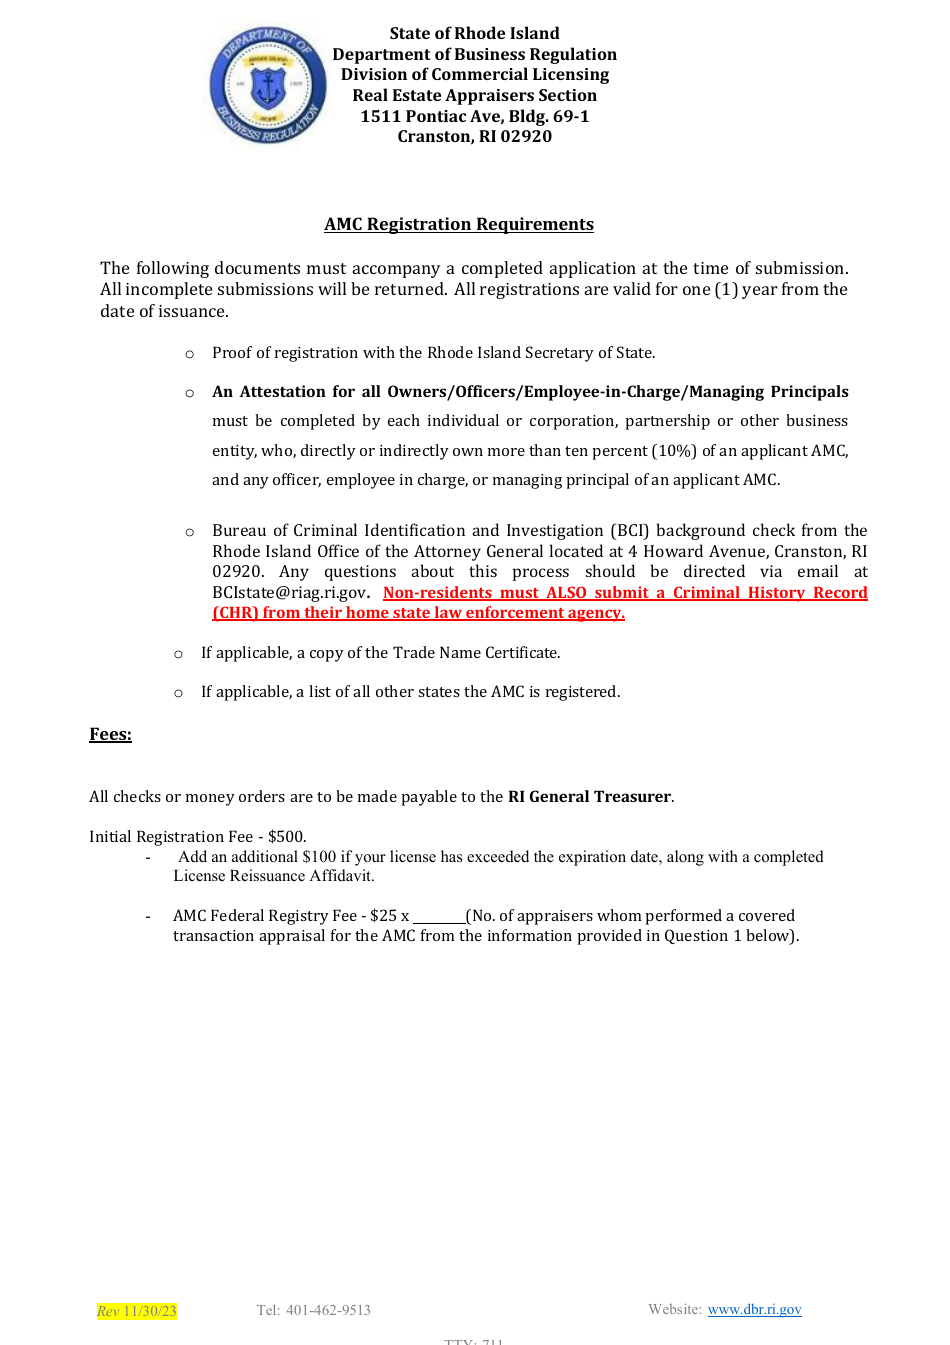 Appraisal Management Company (AMC) Initial / Annual Registration Application - Rhode Island, Page 1